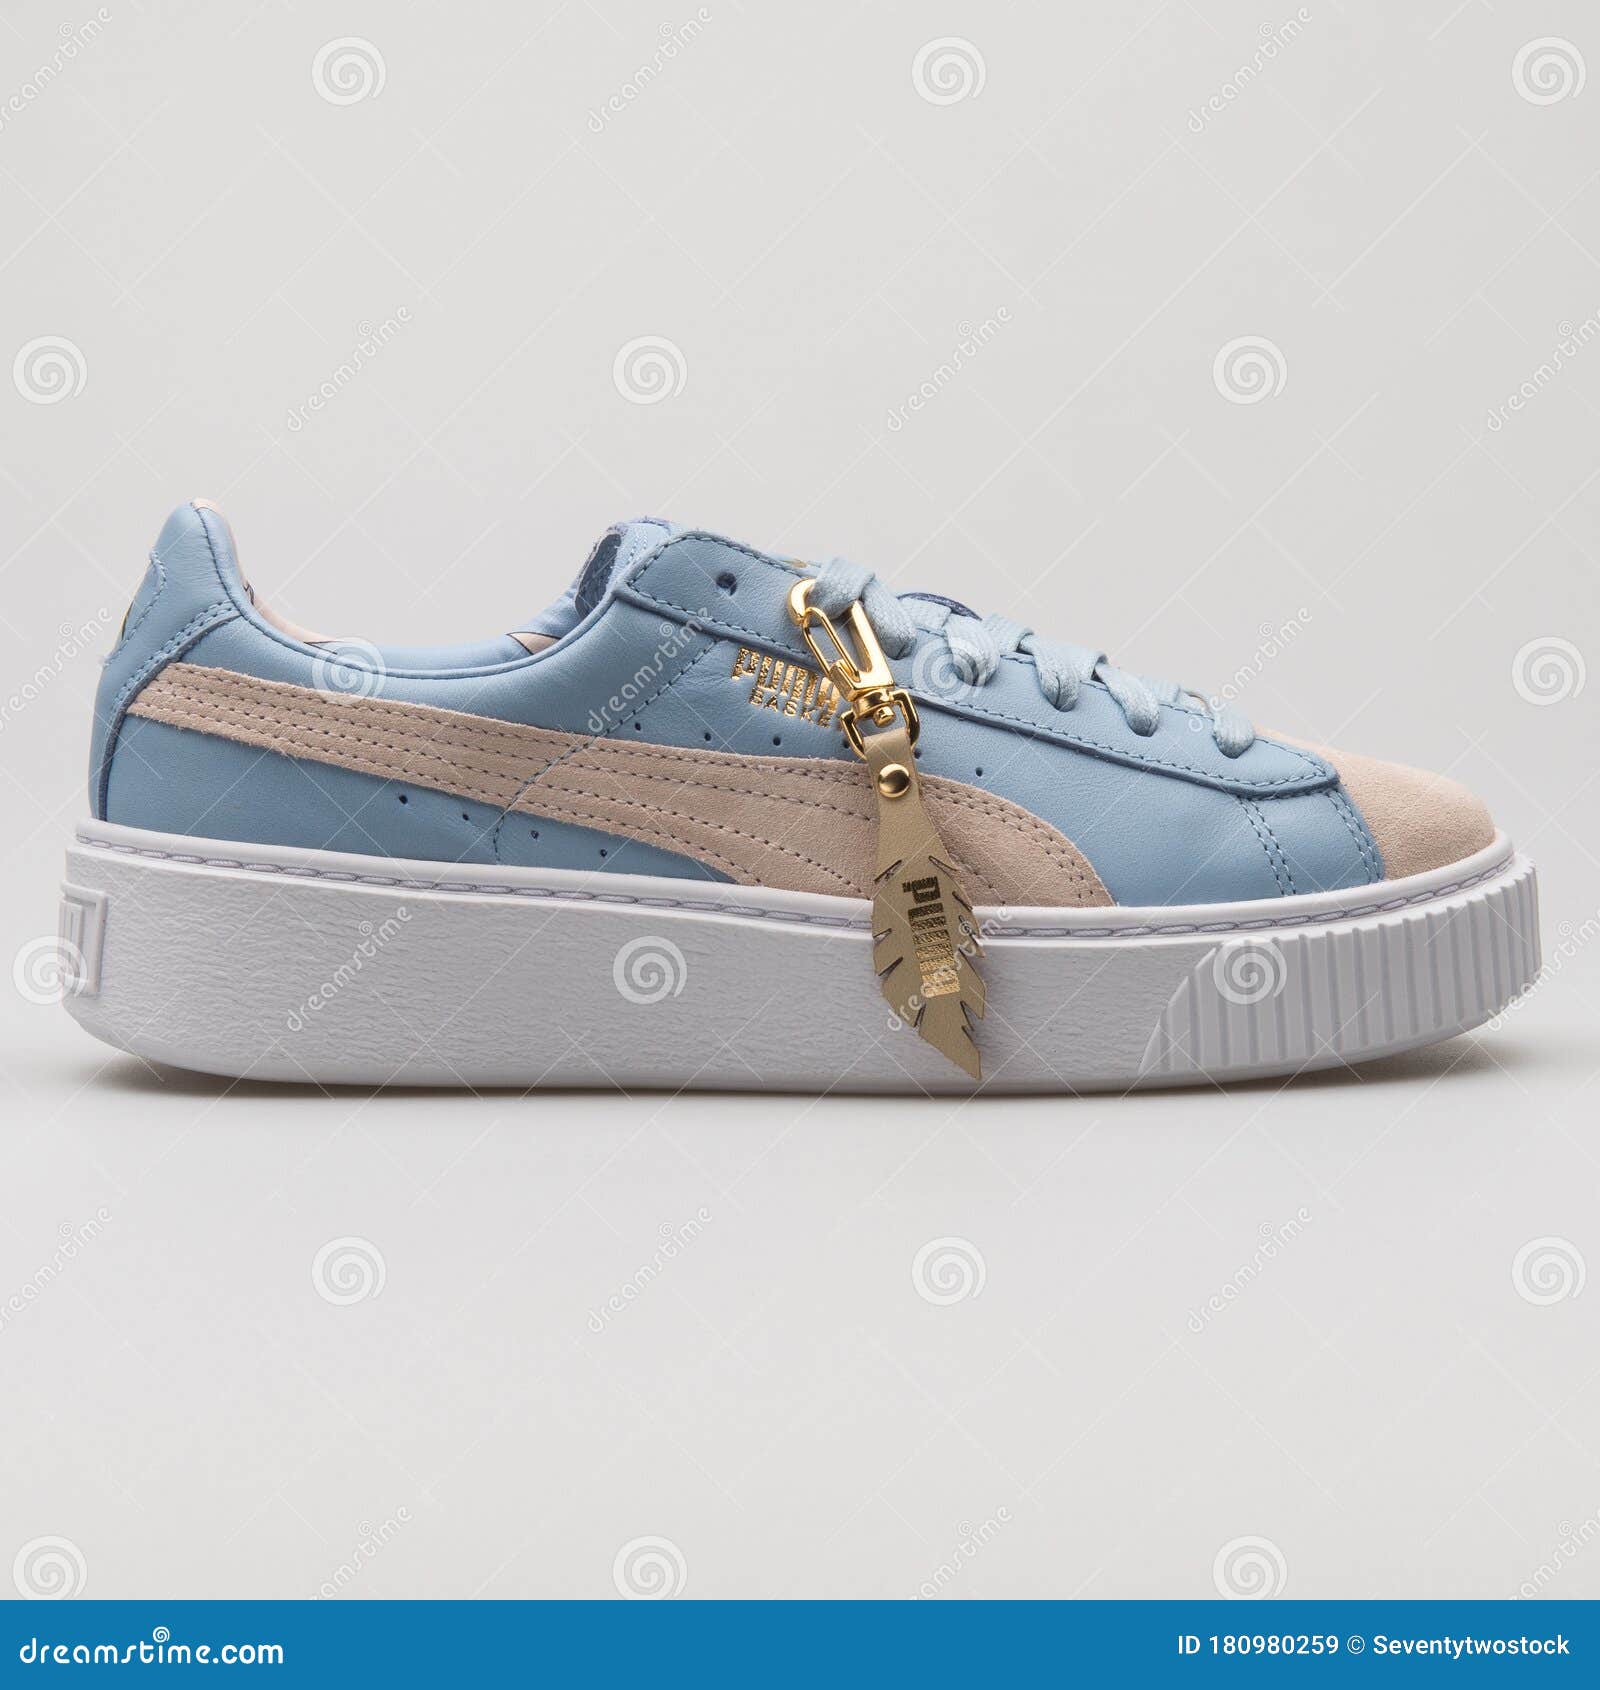 Basket Platform Coach Blue, Beige and White Sneaker Editorial Stock Image - Image activity, fitness: 180980259